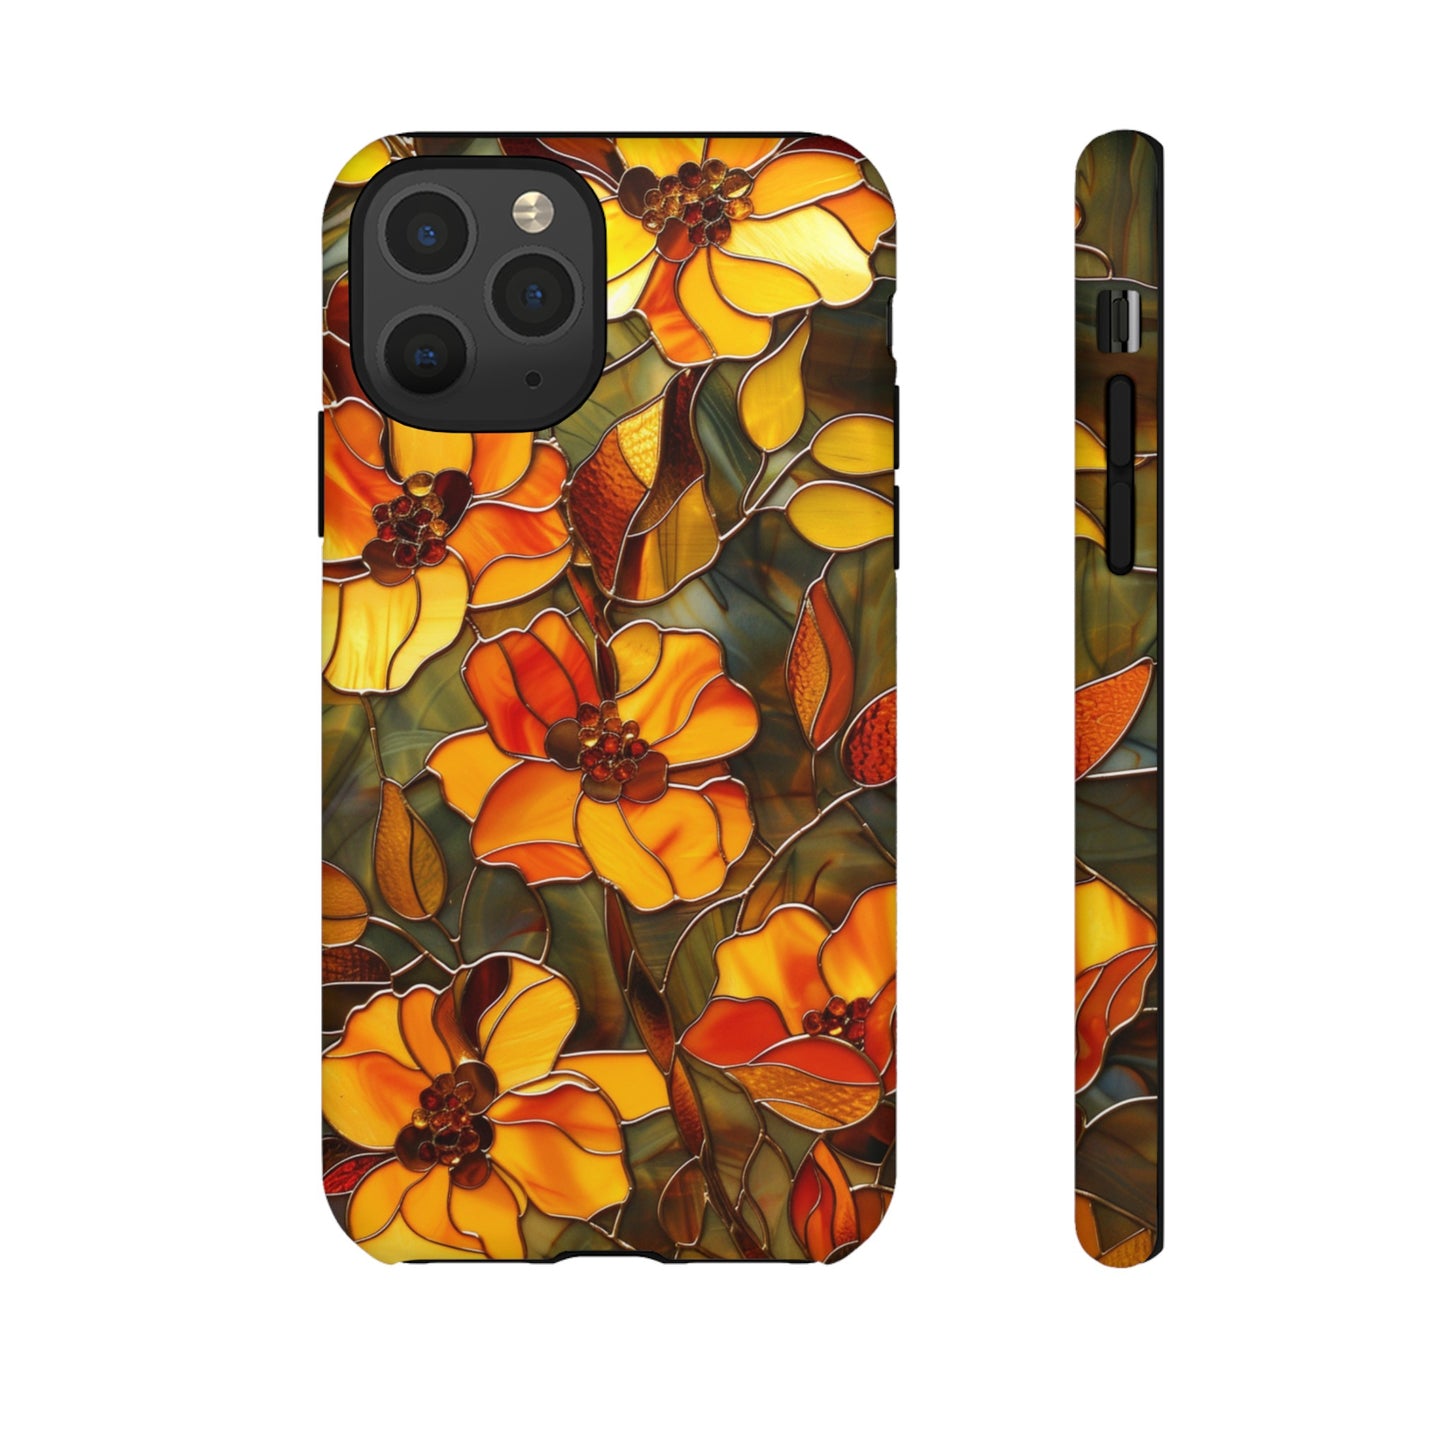 Orange stained glass design phone cover for iPhone 12